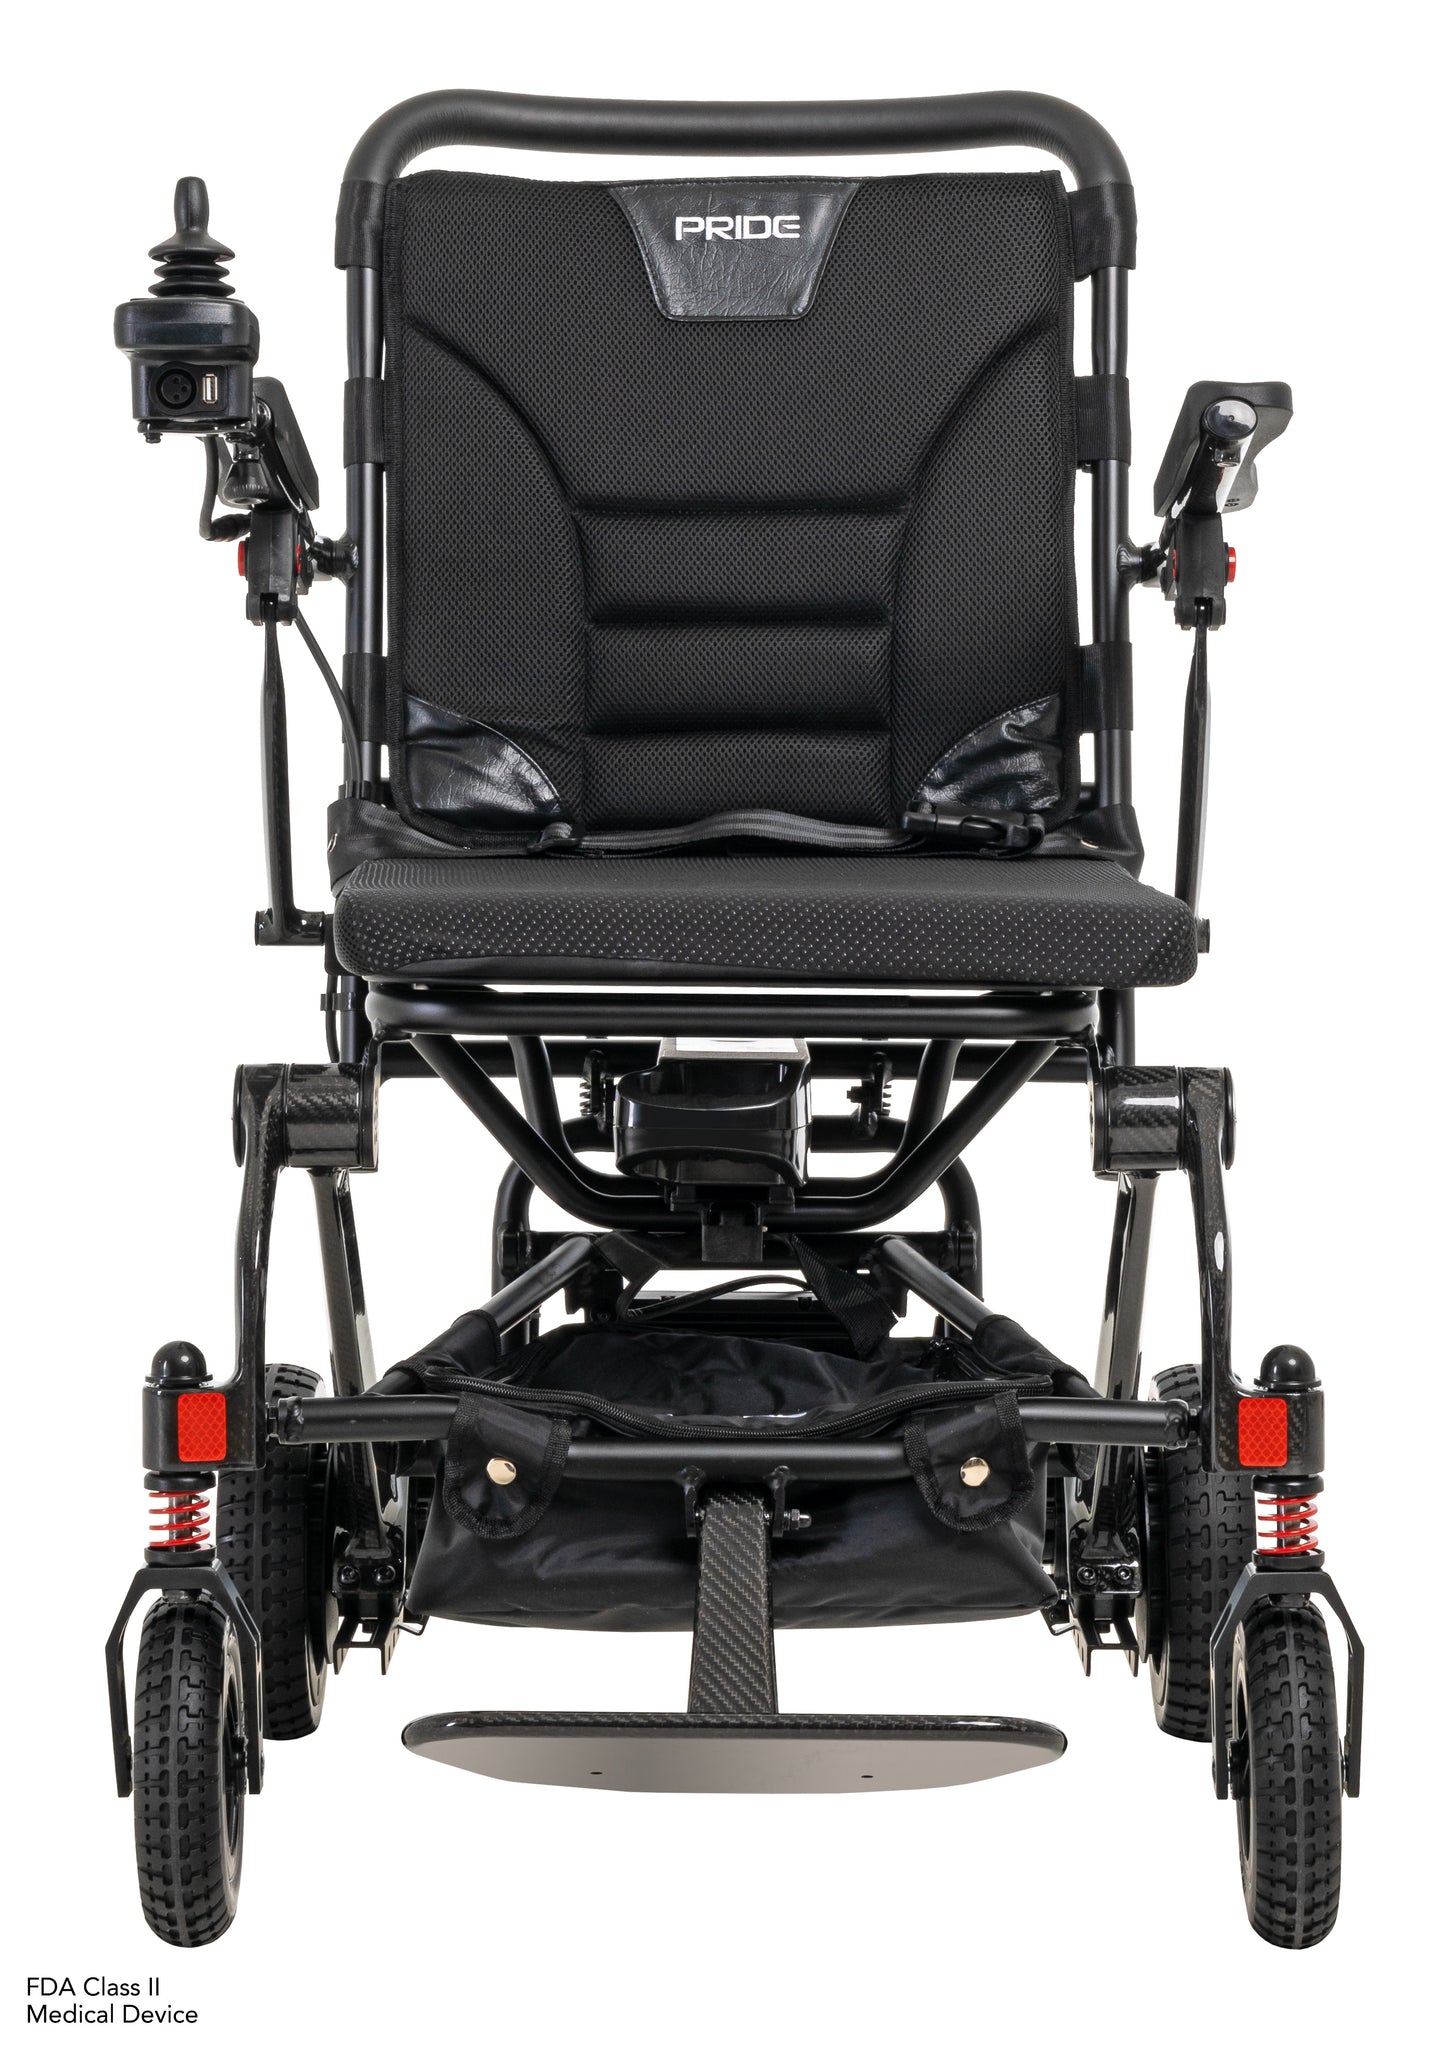 Jazzy Carbon Power Chair